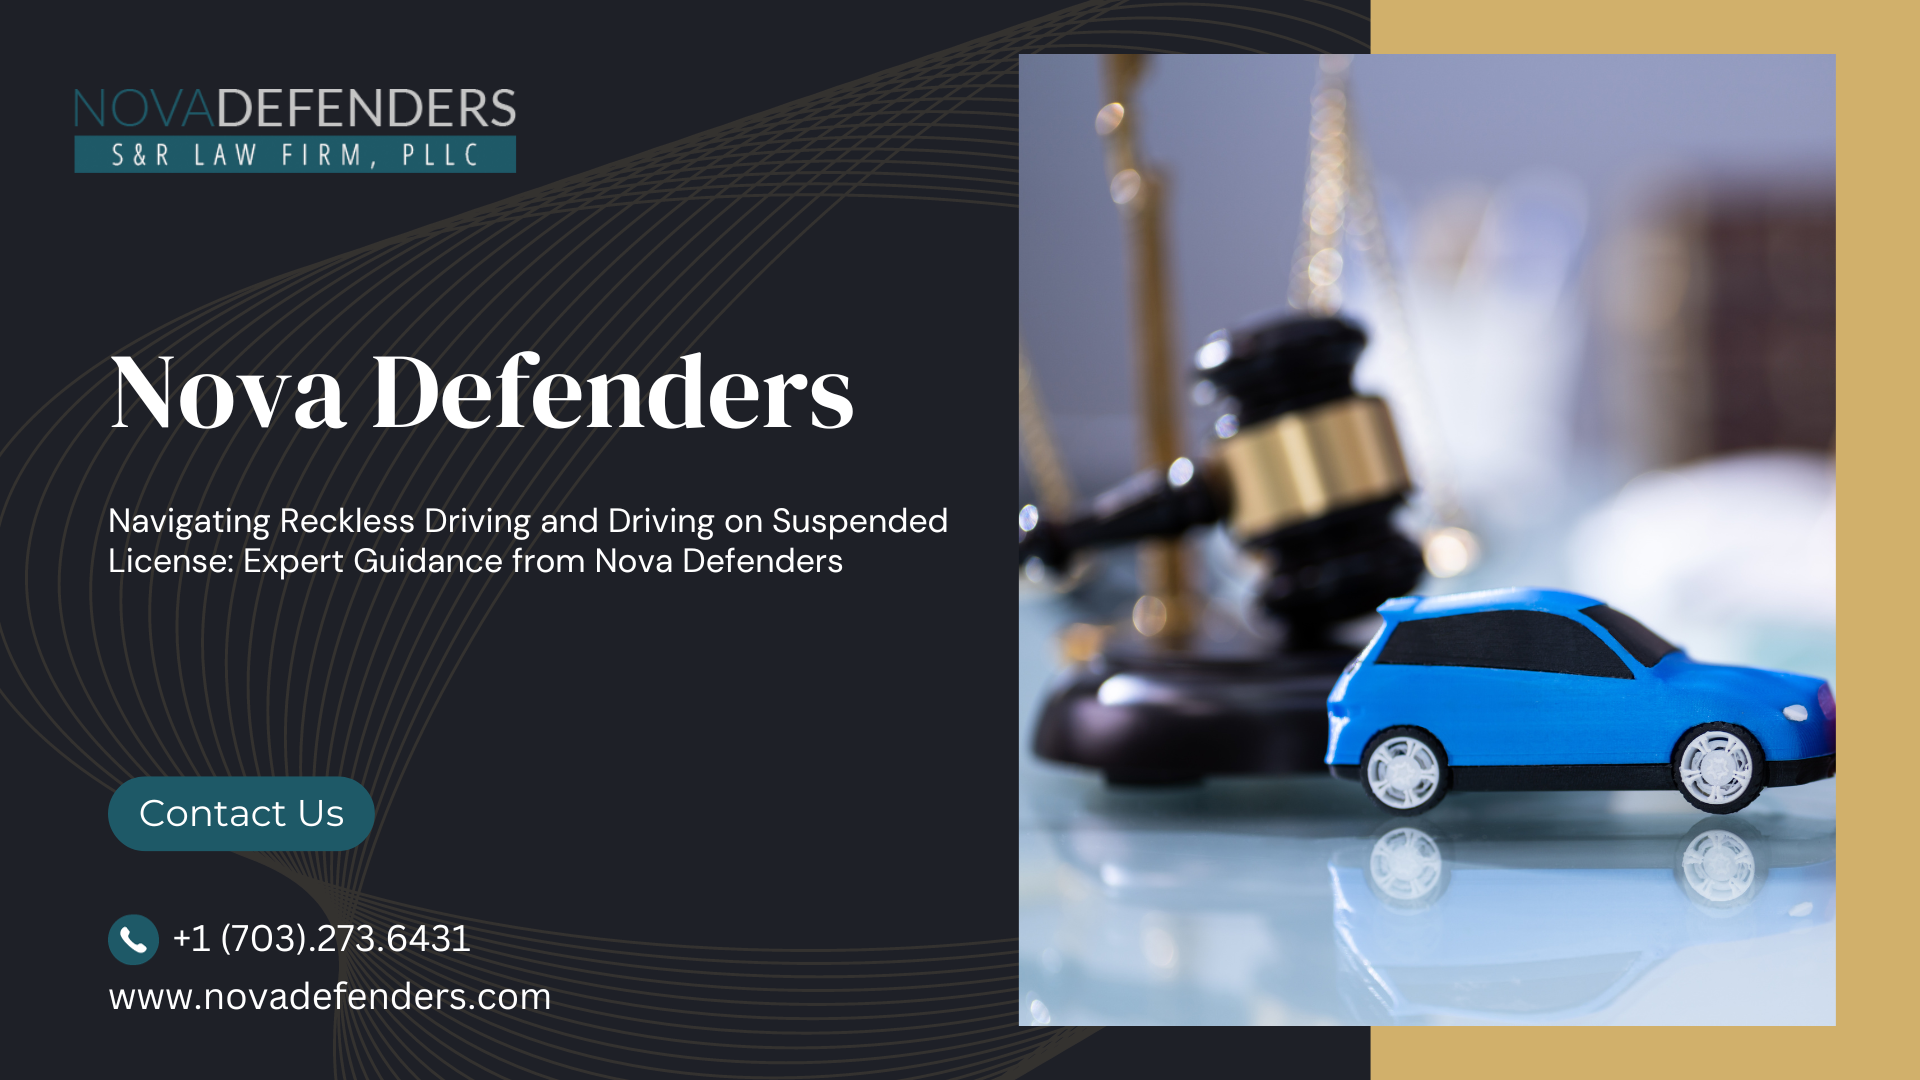 Navigating Reckless Driving and Driving on Suspended License: Expert Guidance from Nova Defenders